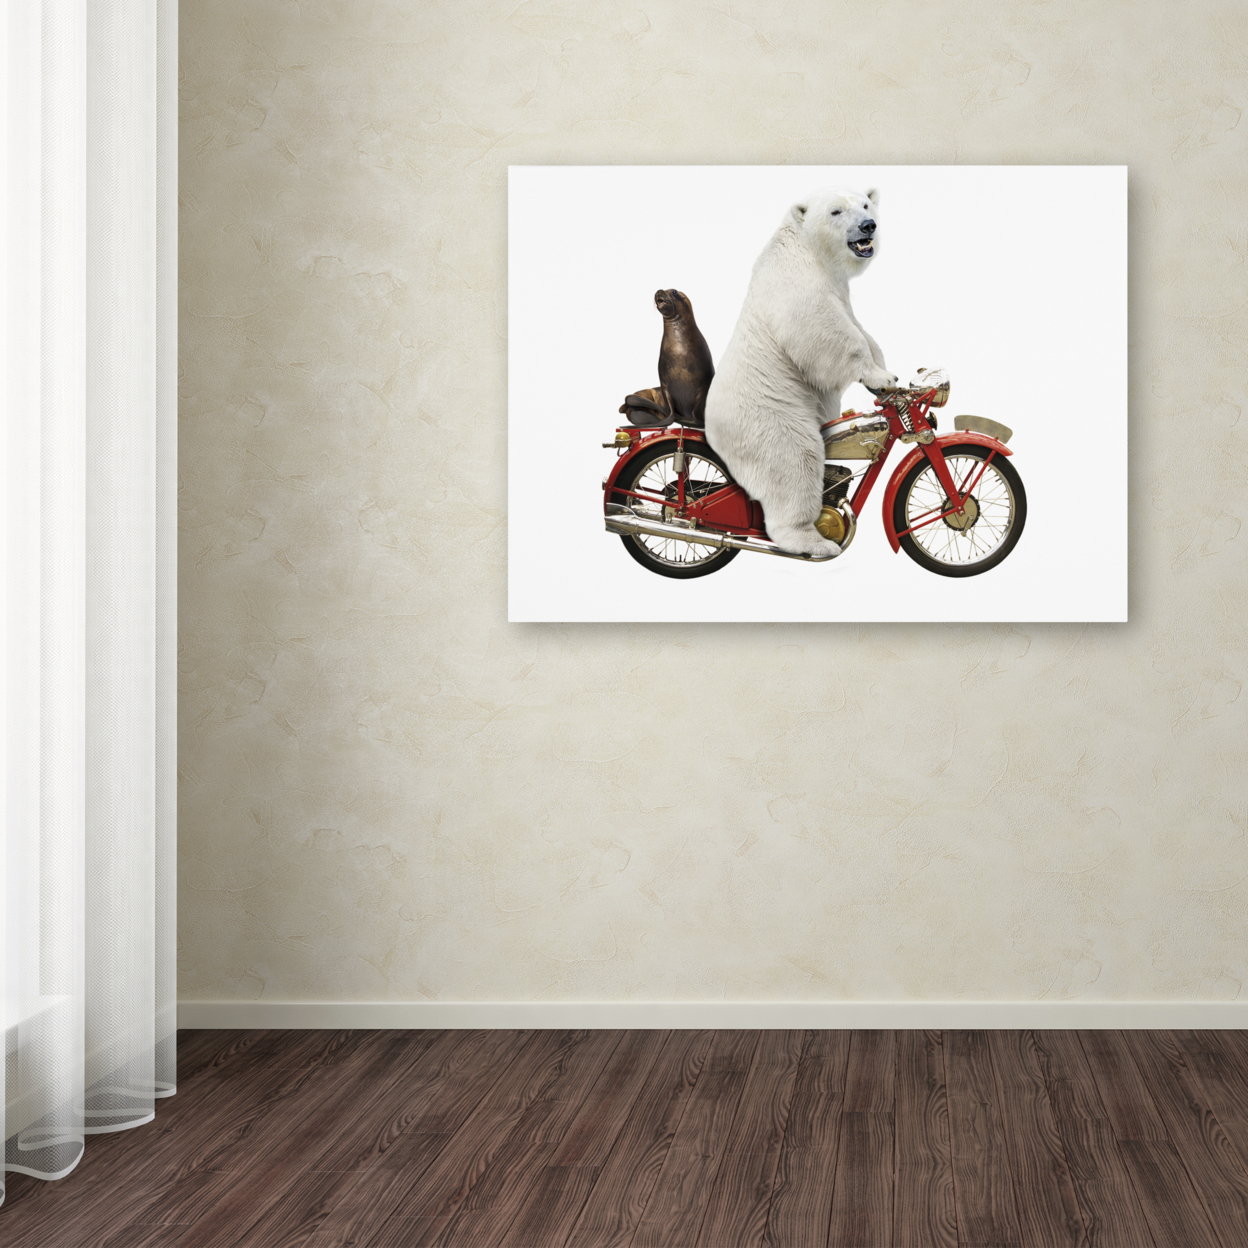 J Hovenstine Studios 'Bringing Home Dinner #1' Canvas Wall Art 35 X 47 Inches